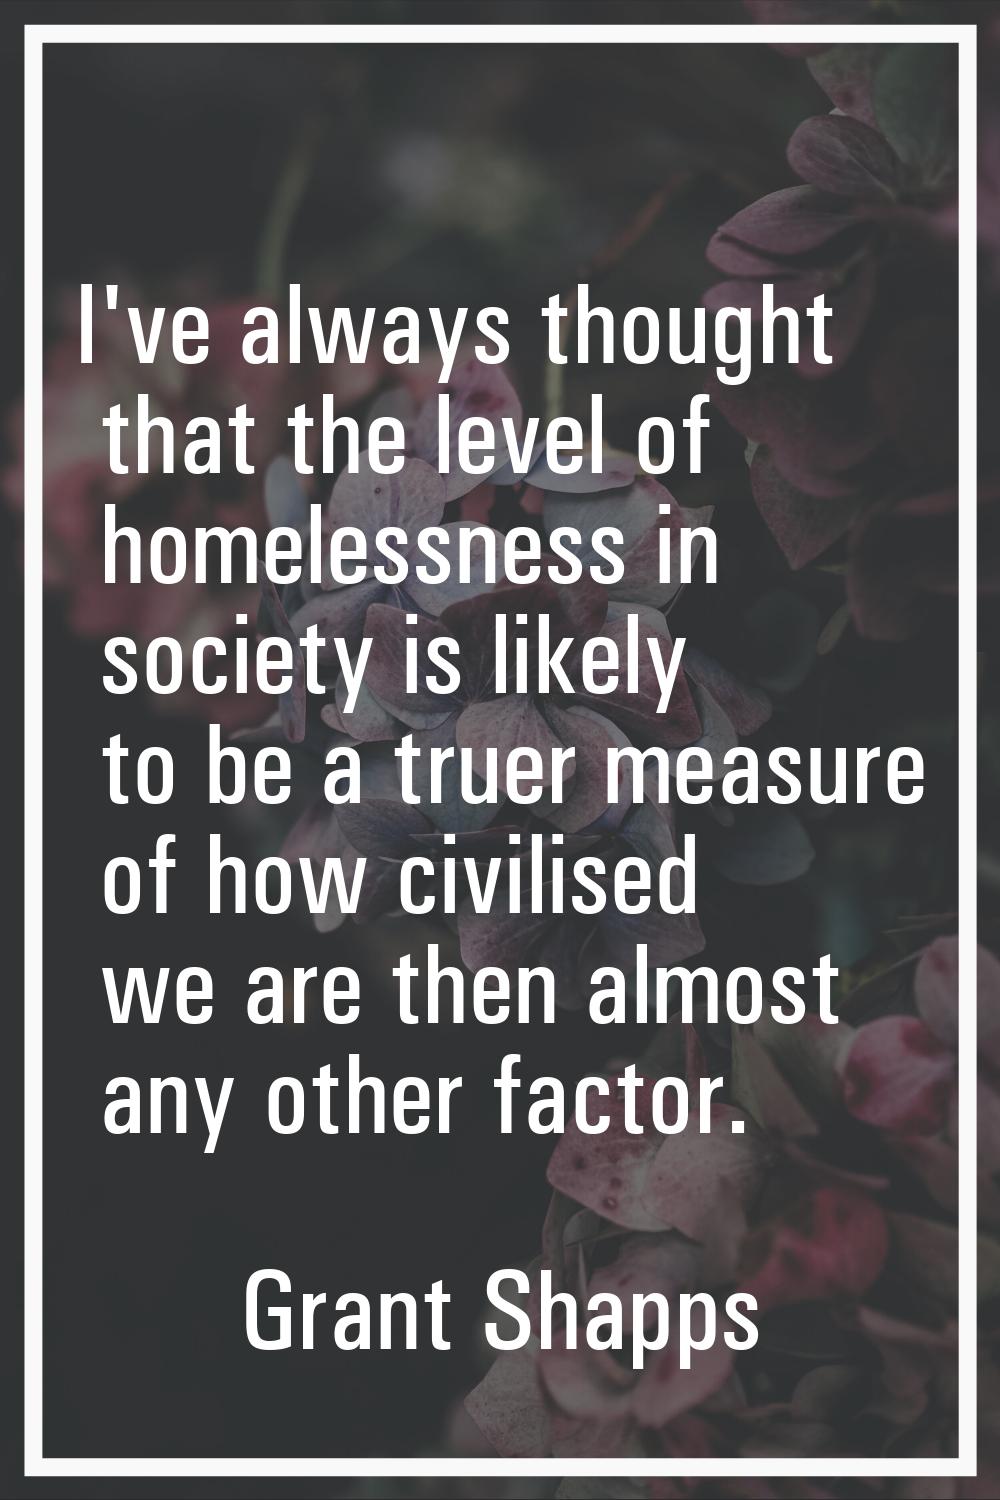 I've always thought that the level of homelessness in society is likely to be a truer measure of ho